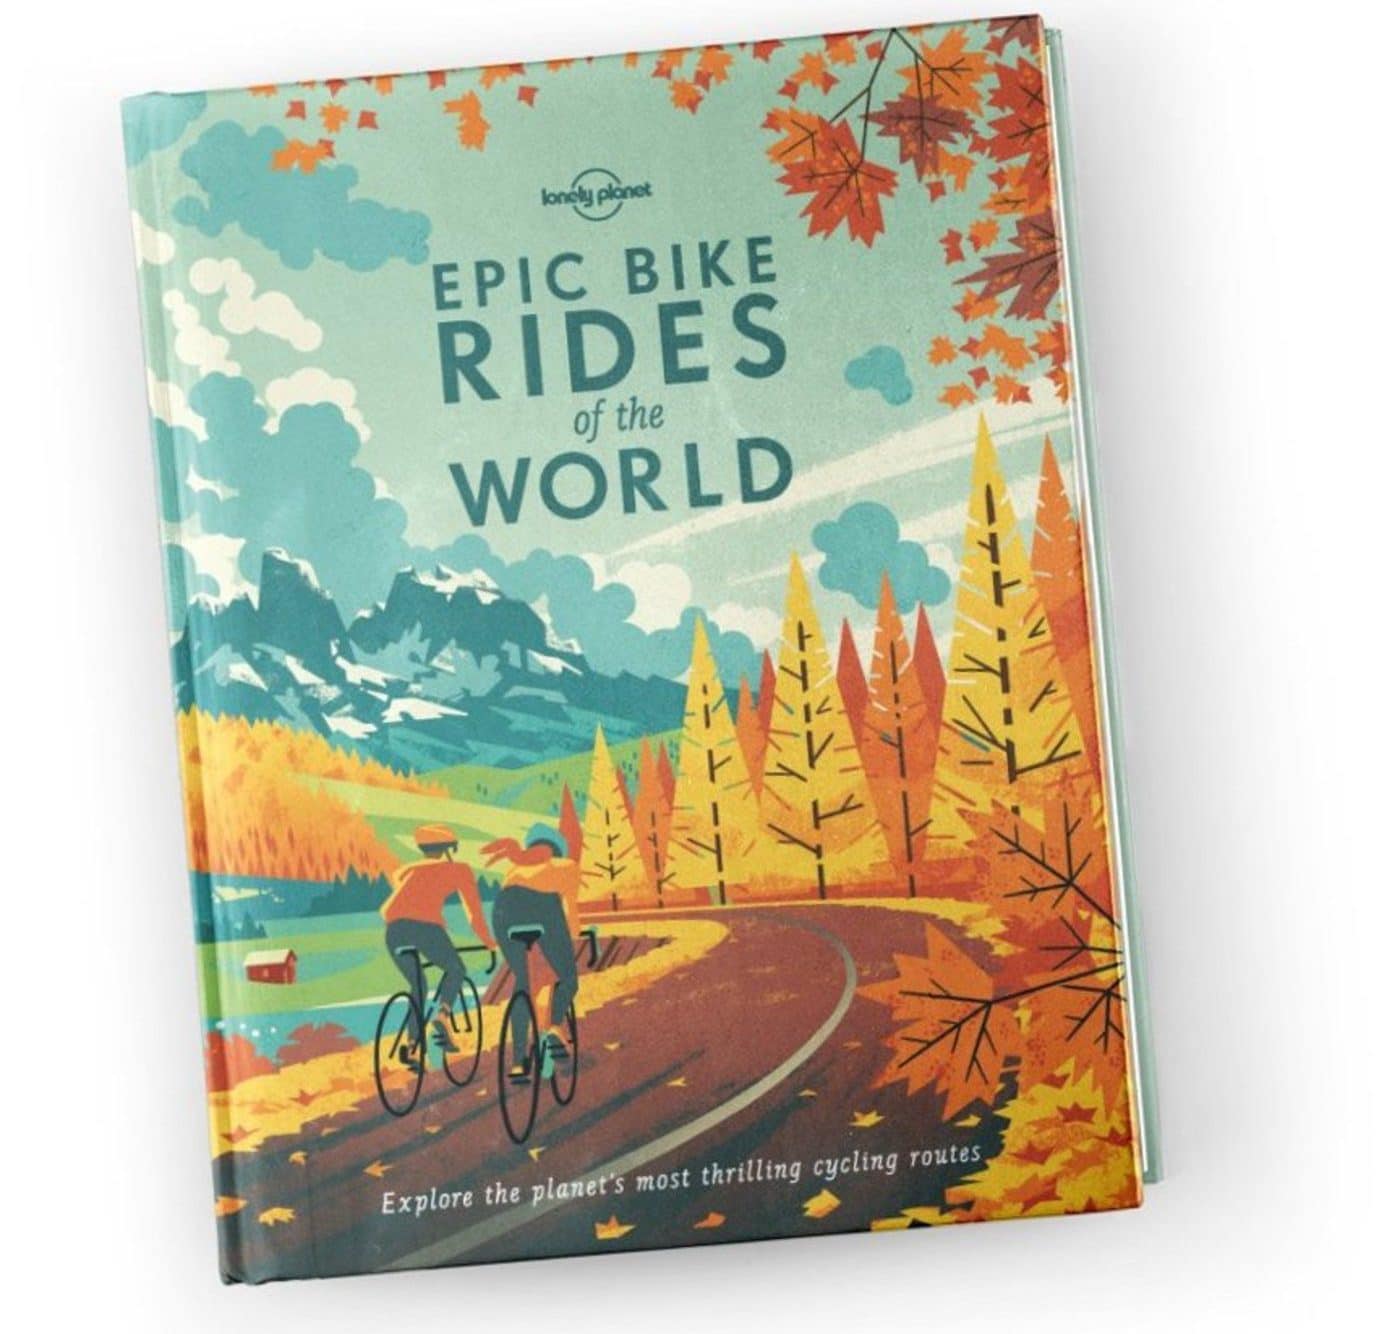 epic bike rides of the world